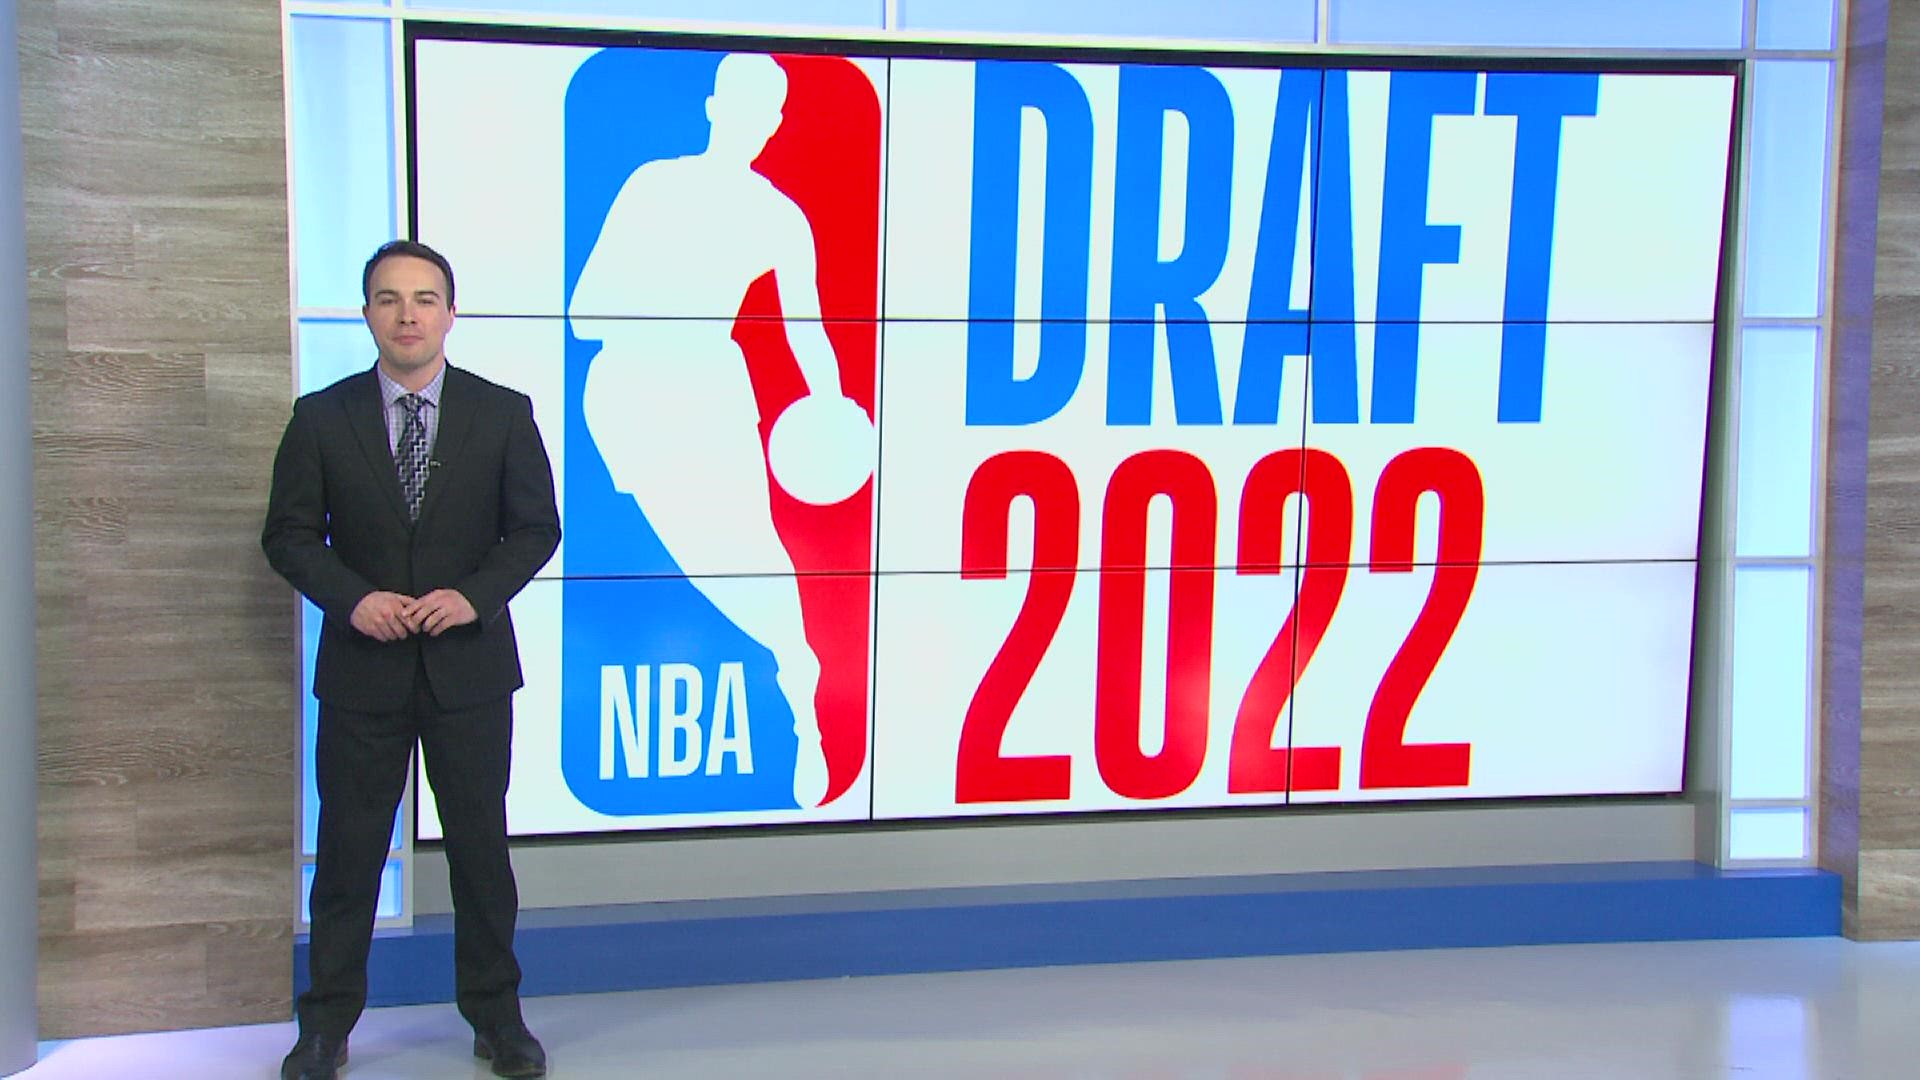 The NBA Draft begins Thursday at 4:30 PM PST. Find out where former Zags Chet Holmgren and Andrew Nembhard are projected to land.